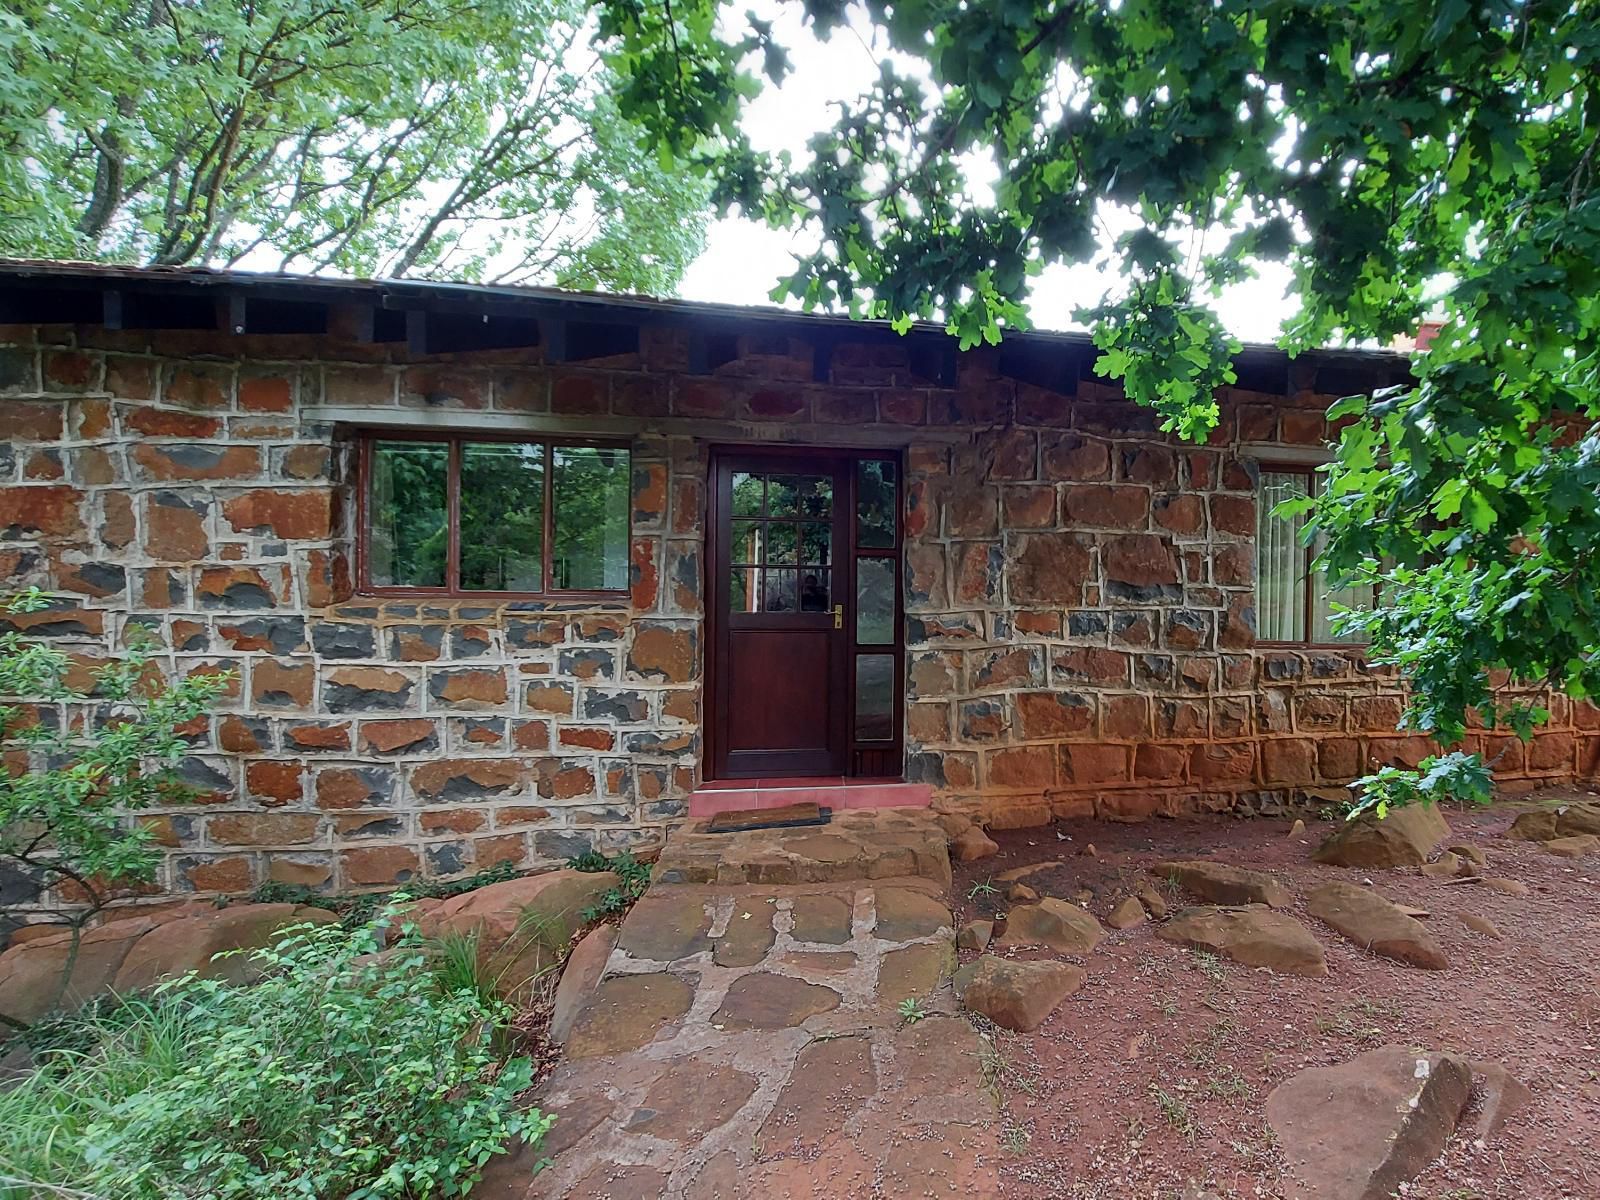 Walkersons Marks Cottage Dullstroom Mpumalanga South Africa Cabin, Building, Architecture